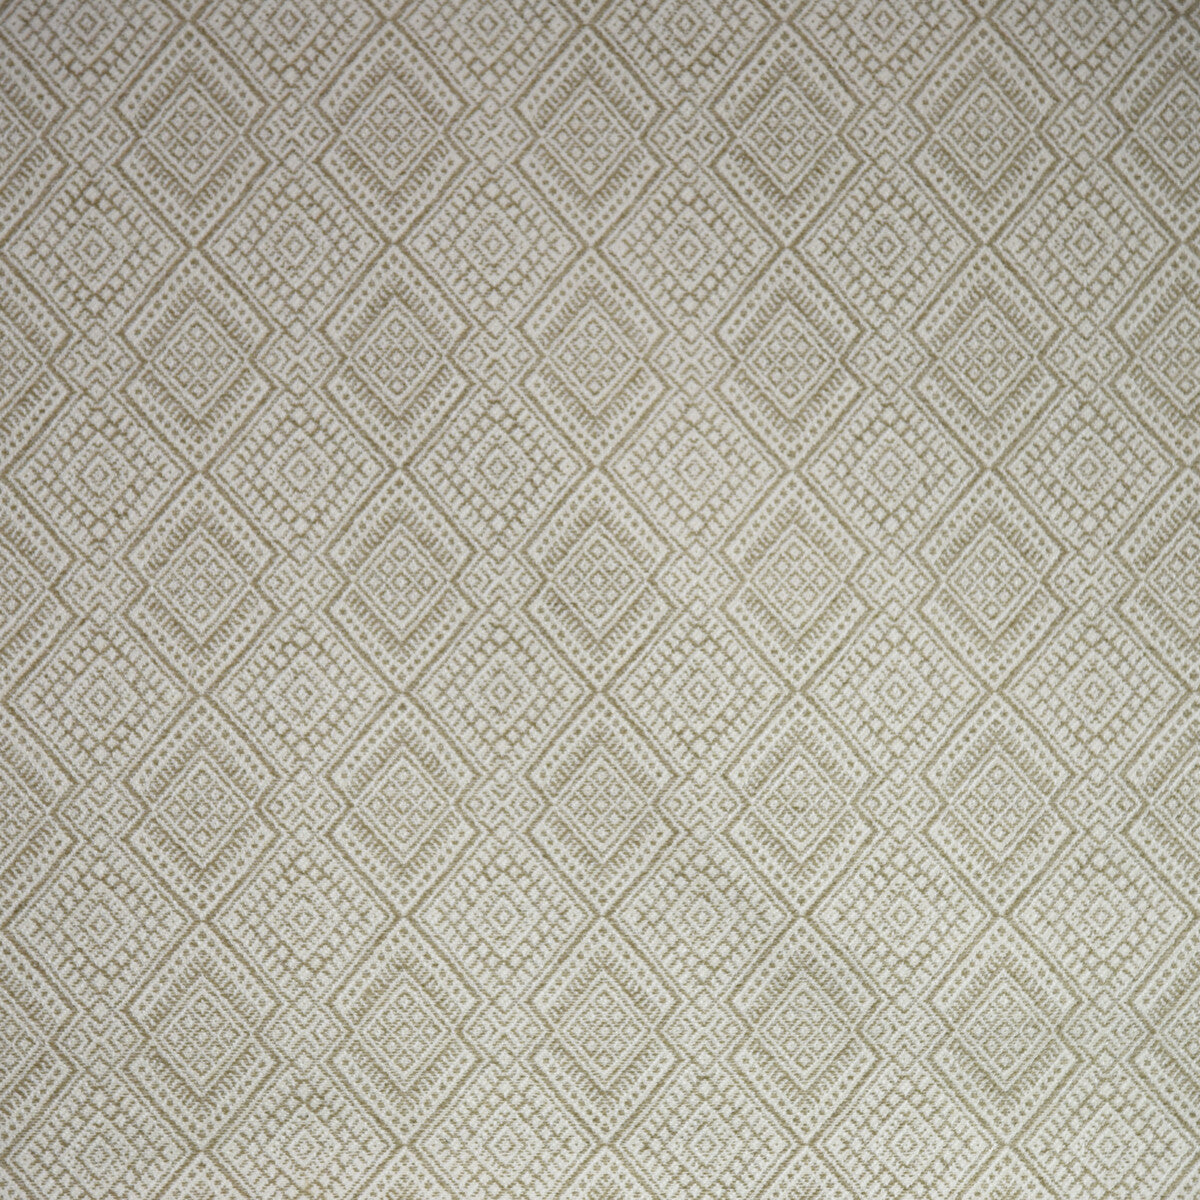 Iguazu fabric in camel color - pattern 35551.16.0 - by Kravet Couture in the Modern Colors-Sojourn Collection collection